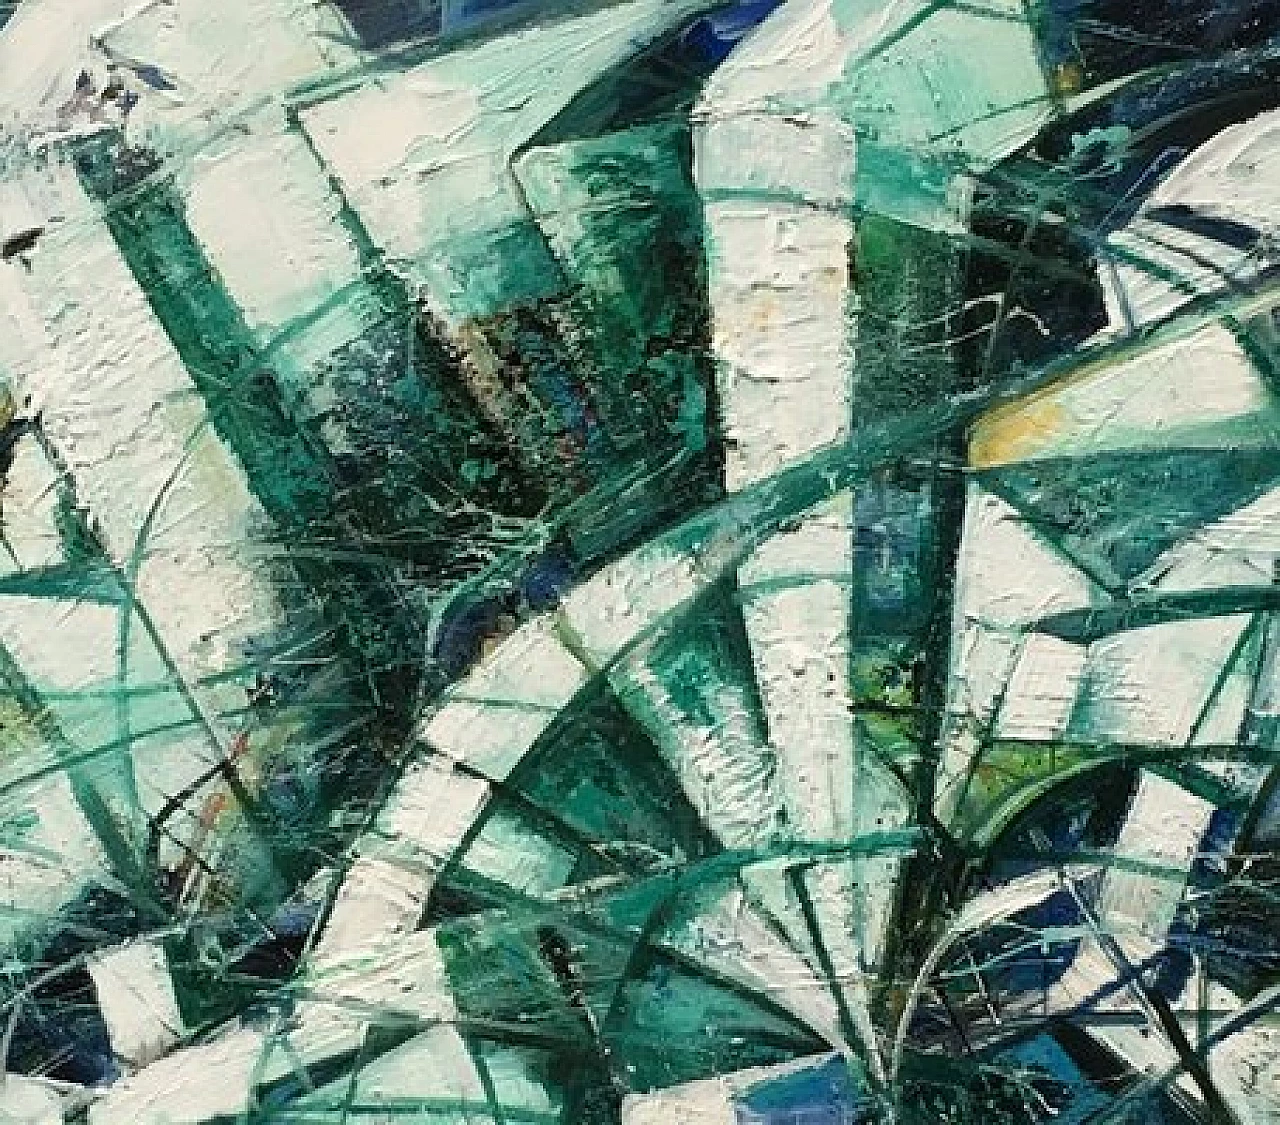 Stefano Iannone, Green Energy, mixed media painting on canvas, 2011 2